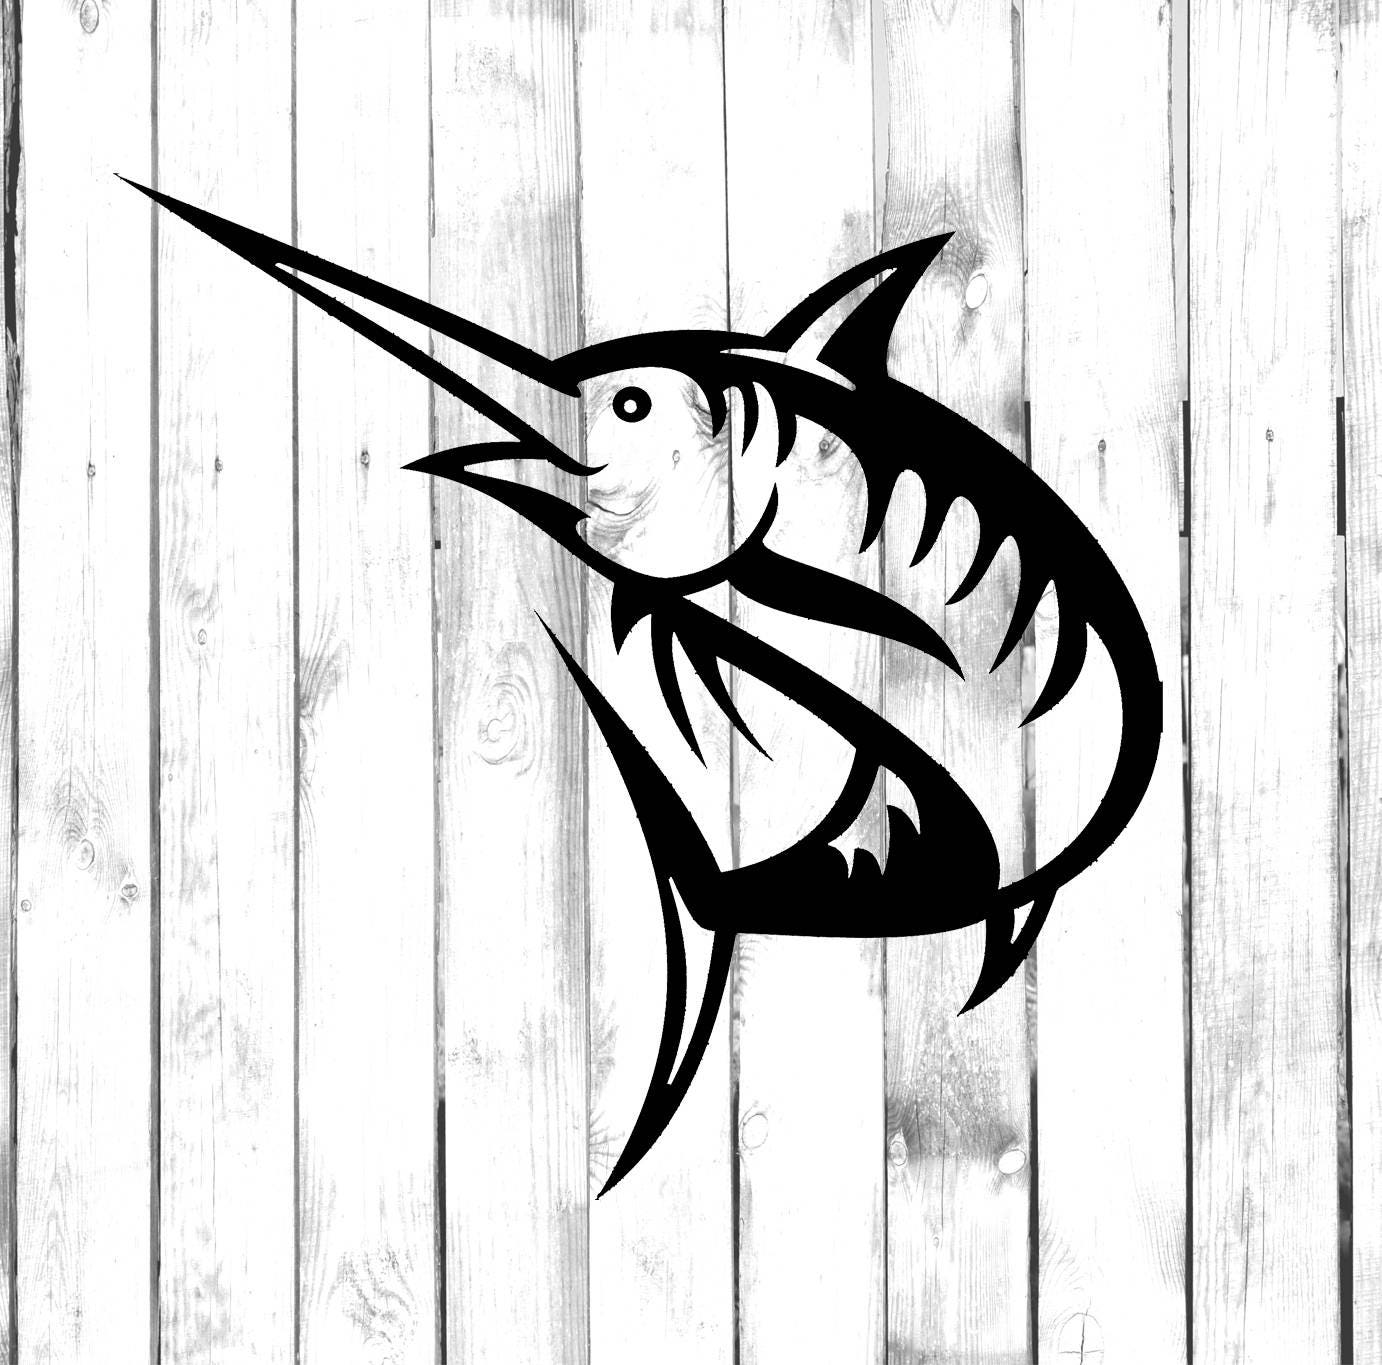 2x Swordfish fish Decal Sticker Different colors & size for  Cars/Bikes/Windows